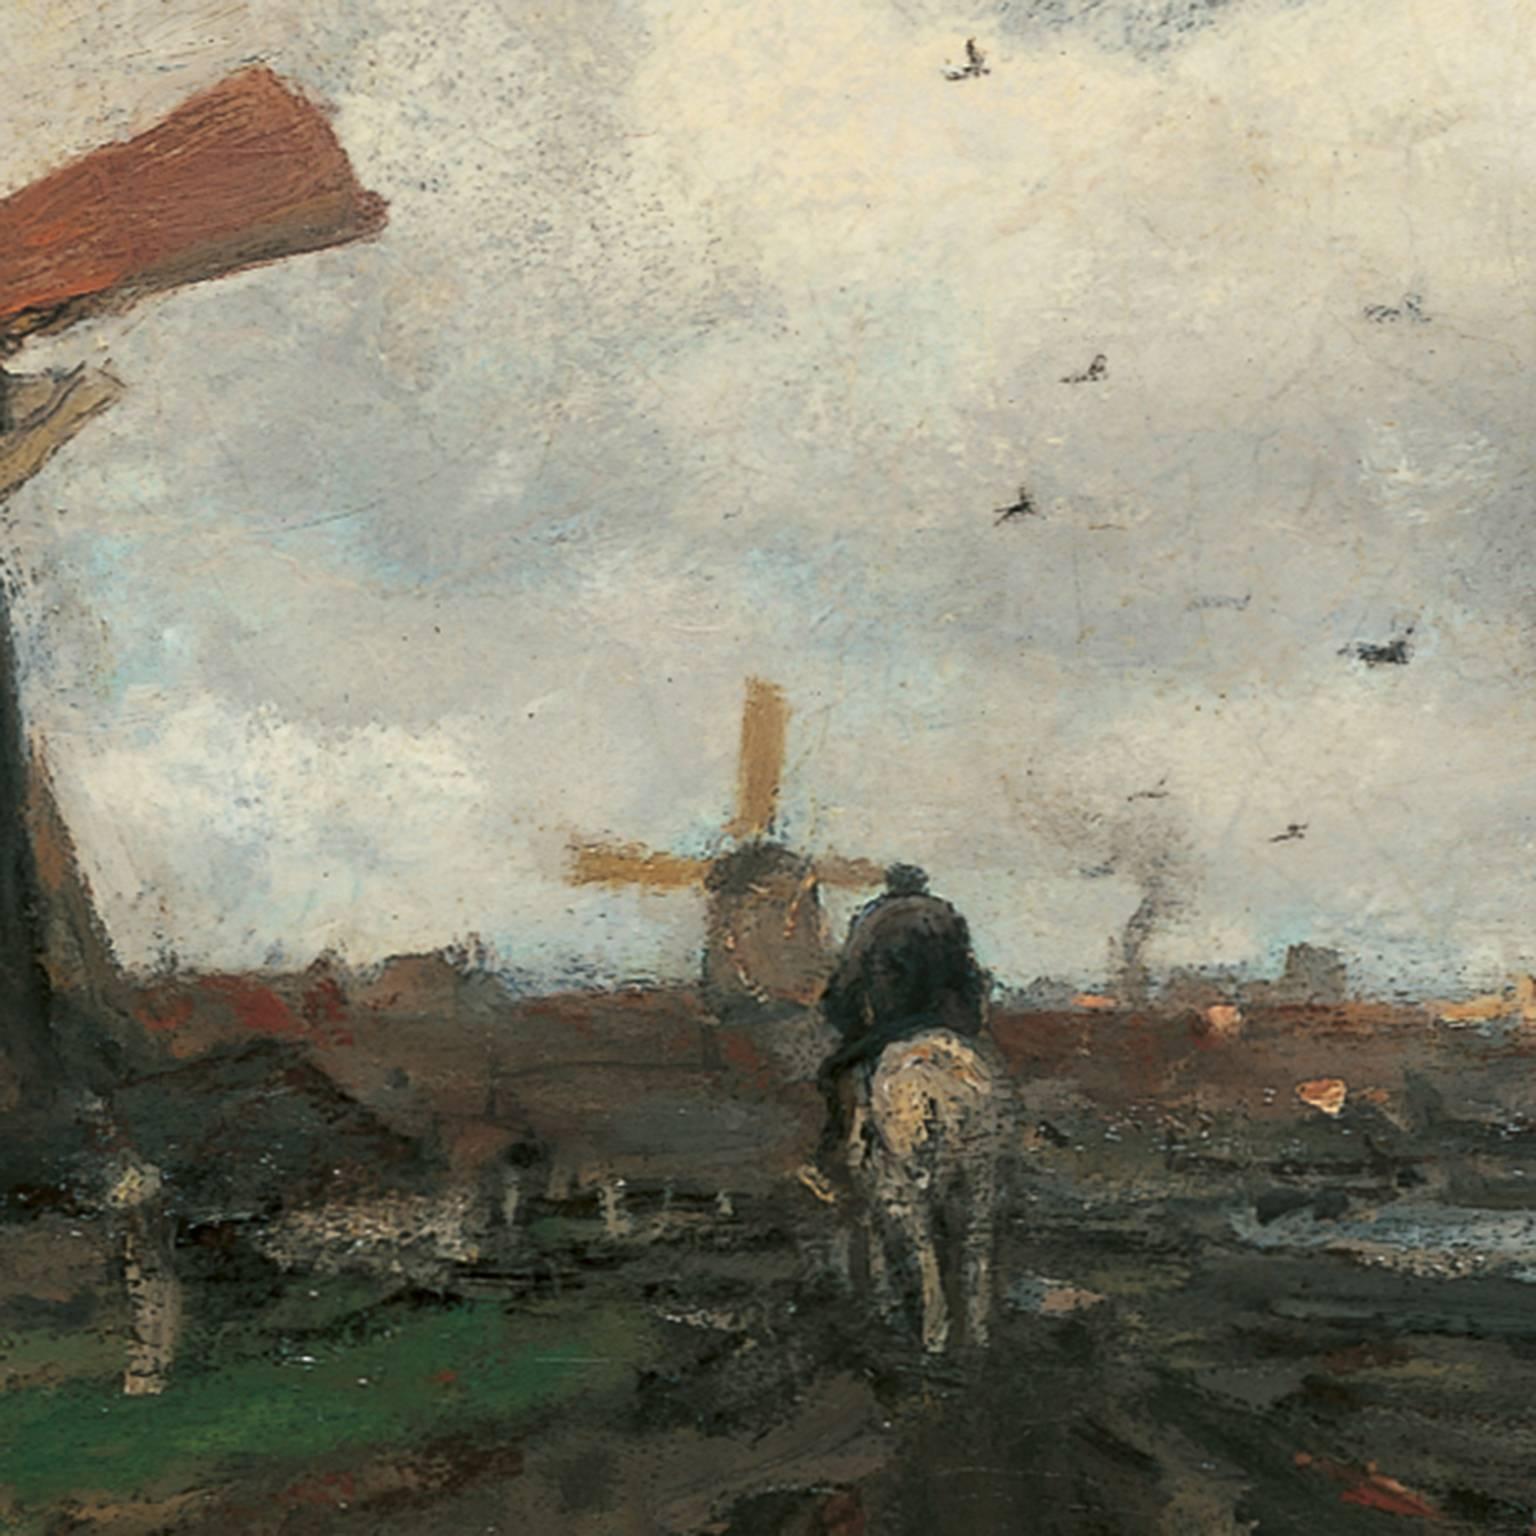 Windmills along a canal - Painting by Jacob Hendricus Maris